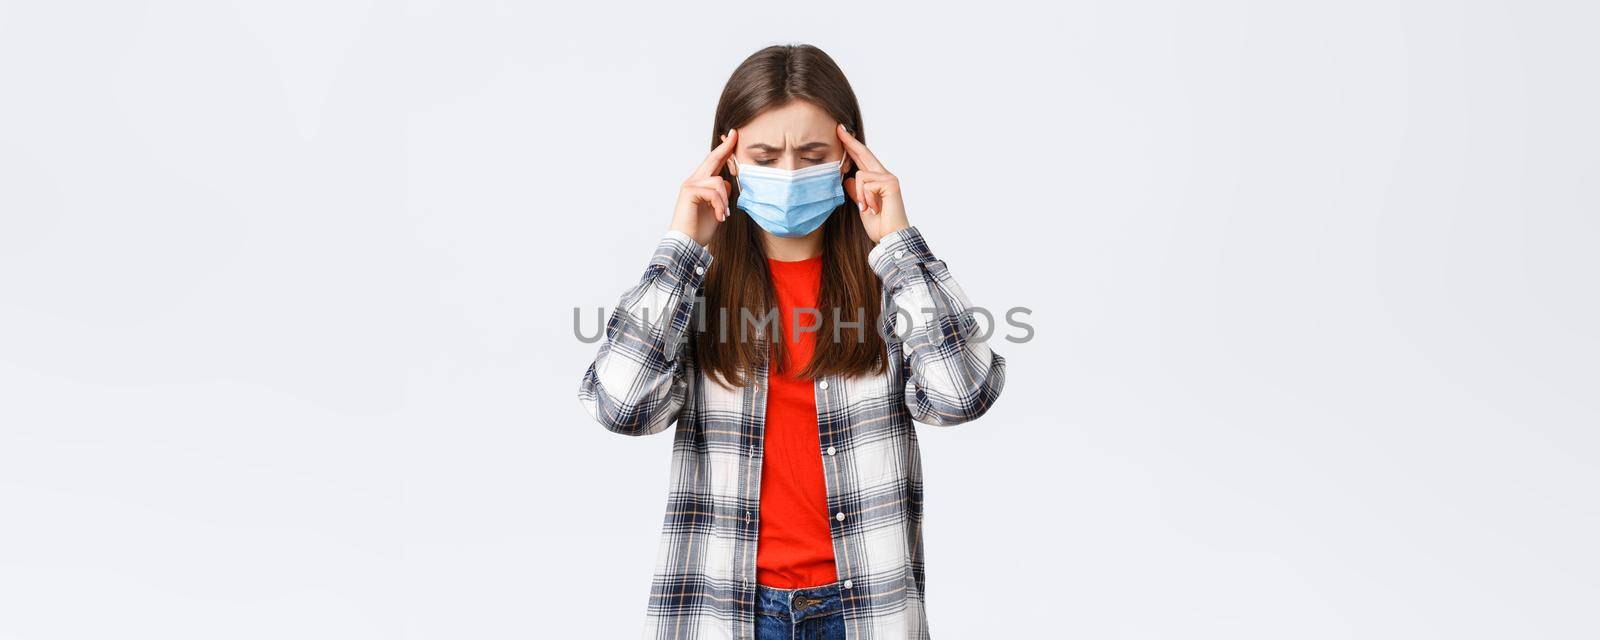 Coronavirus outbreak, leisure on quarantine, social distancing and emotions concept. Woman trying concentrate, thinking, close eyes rub temples, have fever covid-19 symptom, feeling dizzy or sick.